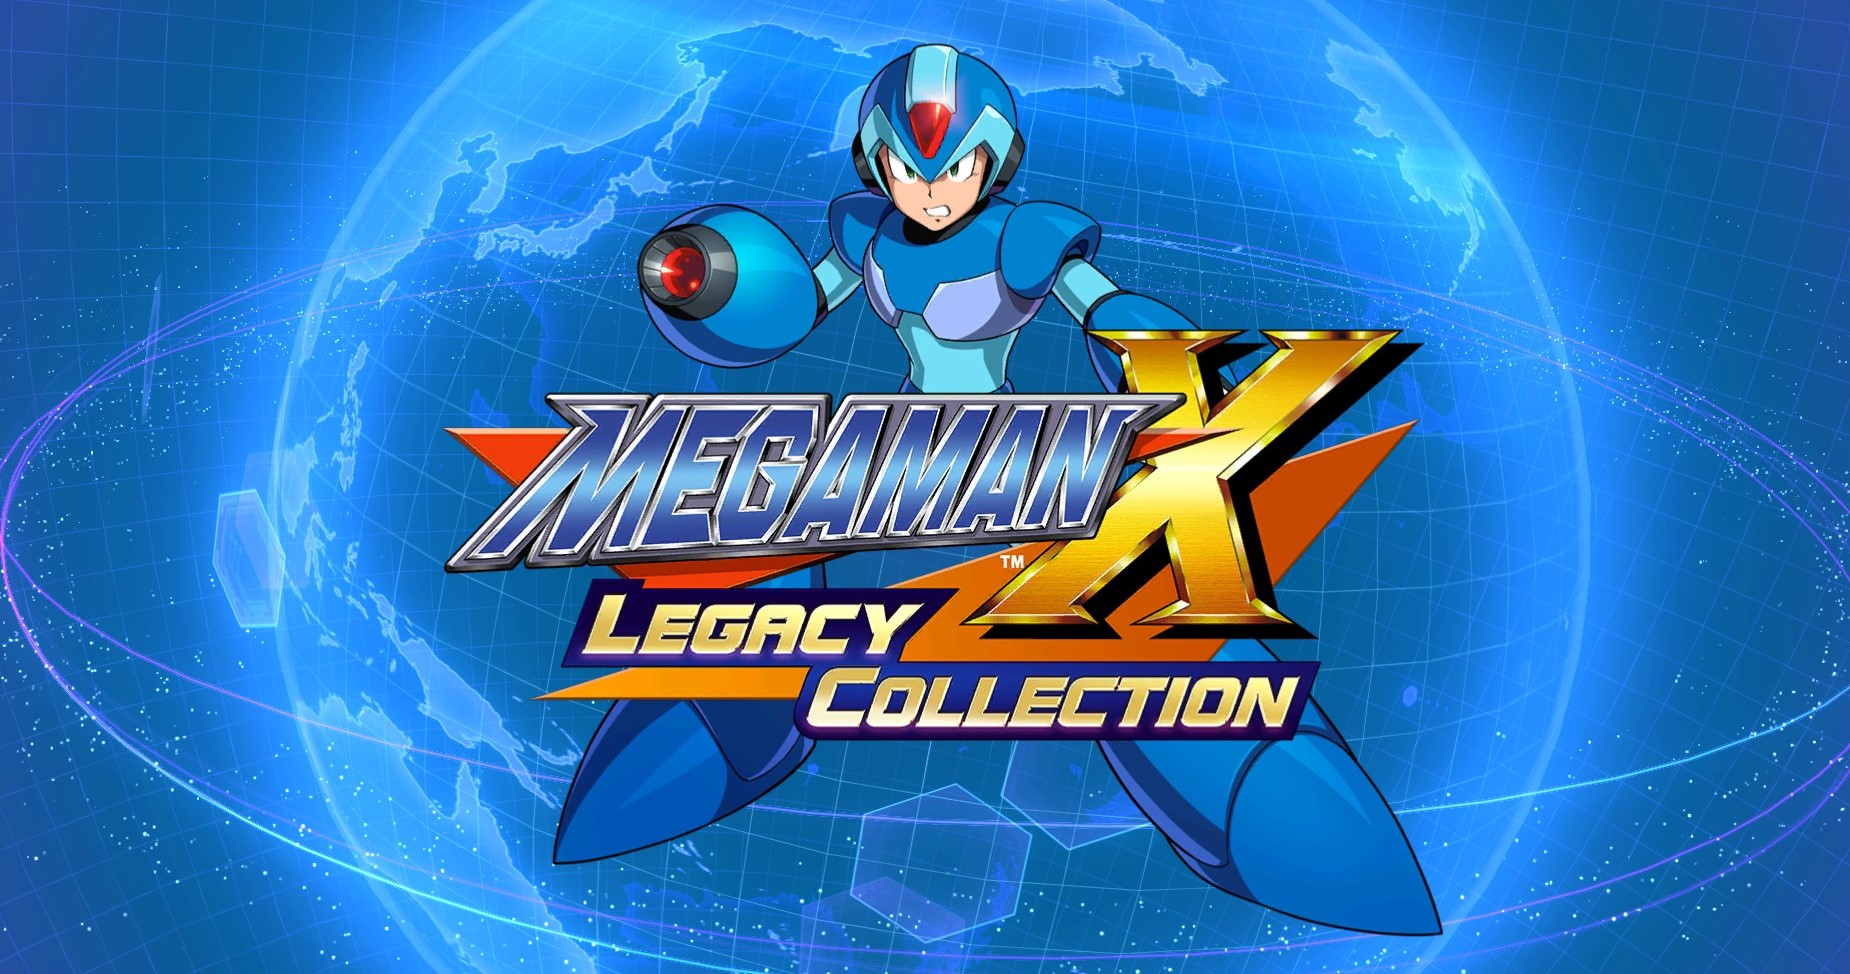 A Quick Word On Which Versions Of Mega Man X Legacy Collection To